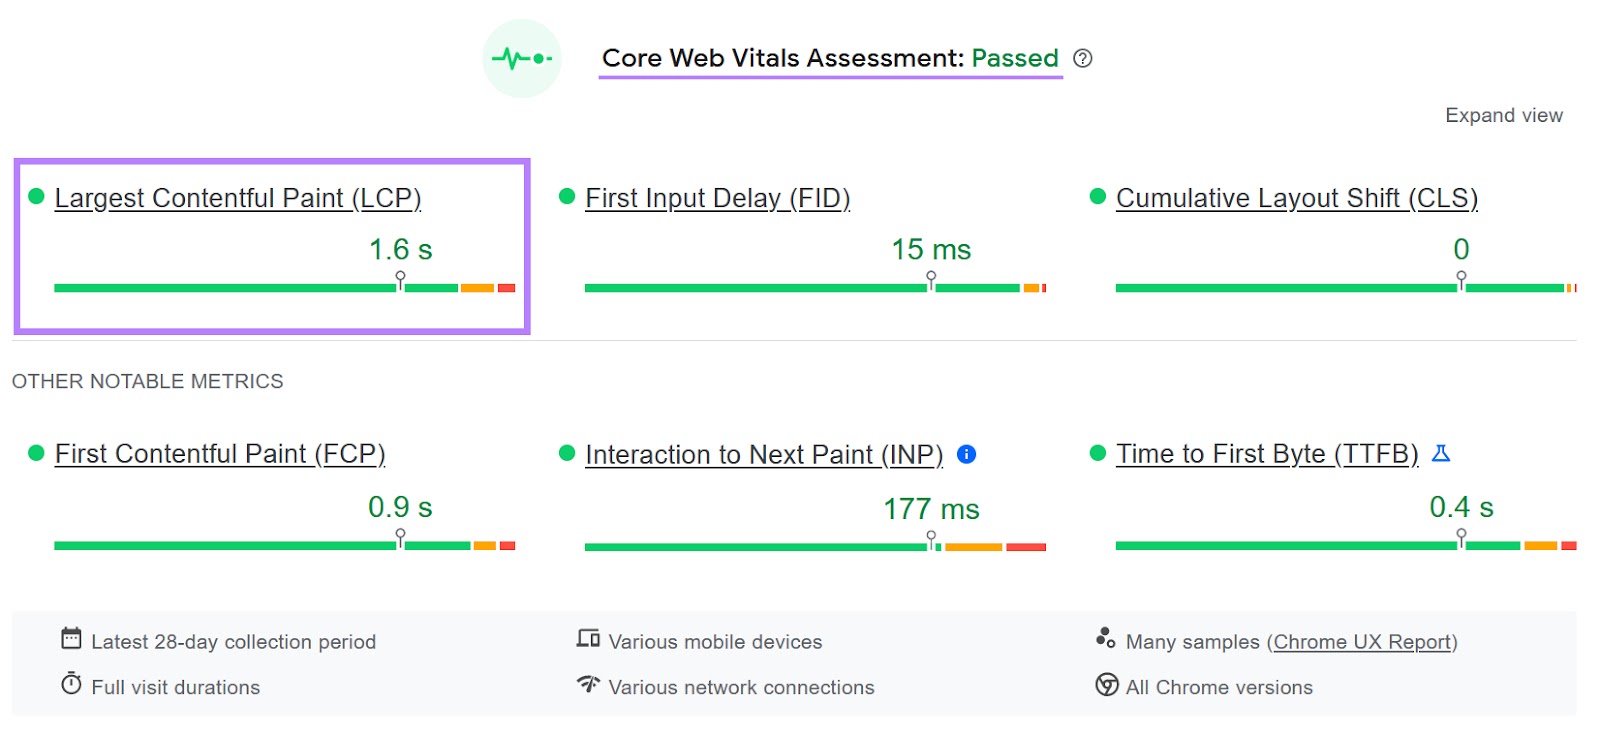 "Largest Contentful Paint (LCP)" metric highlighted under “Core Web Vitals assessment”